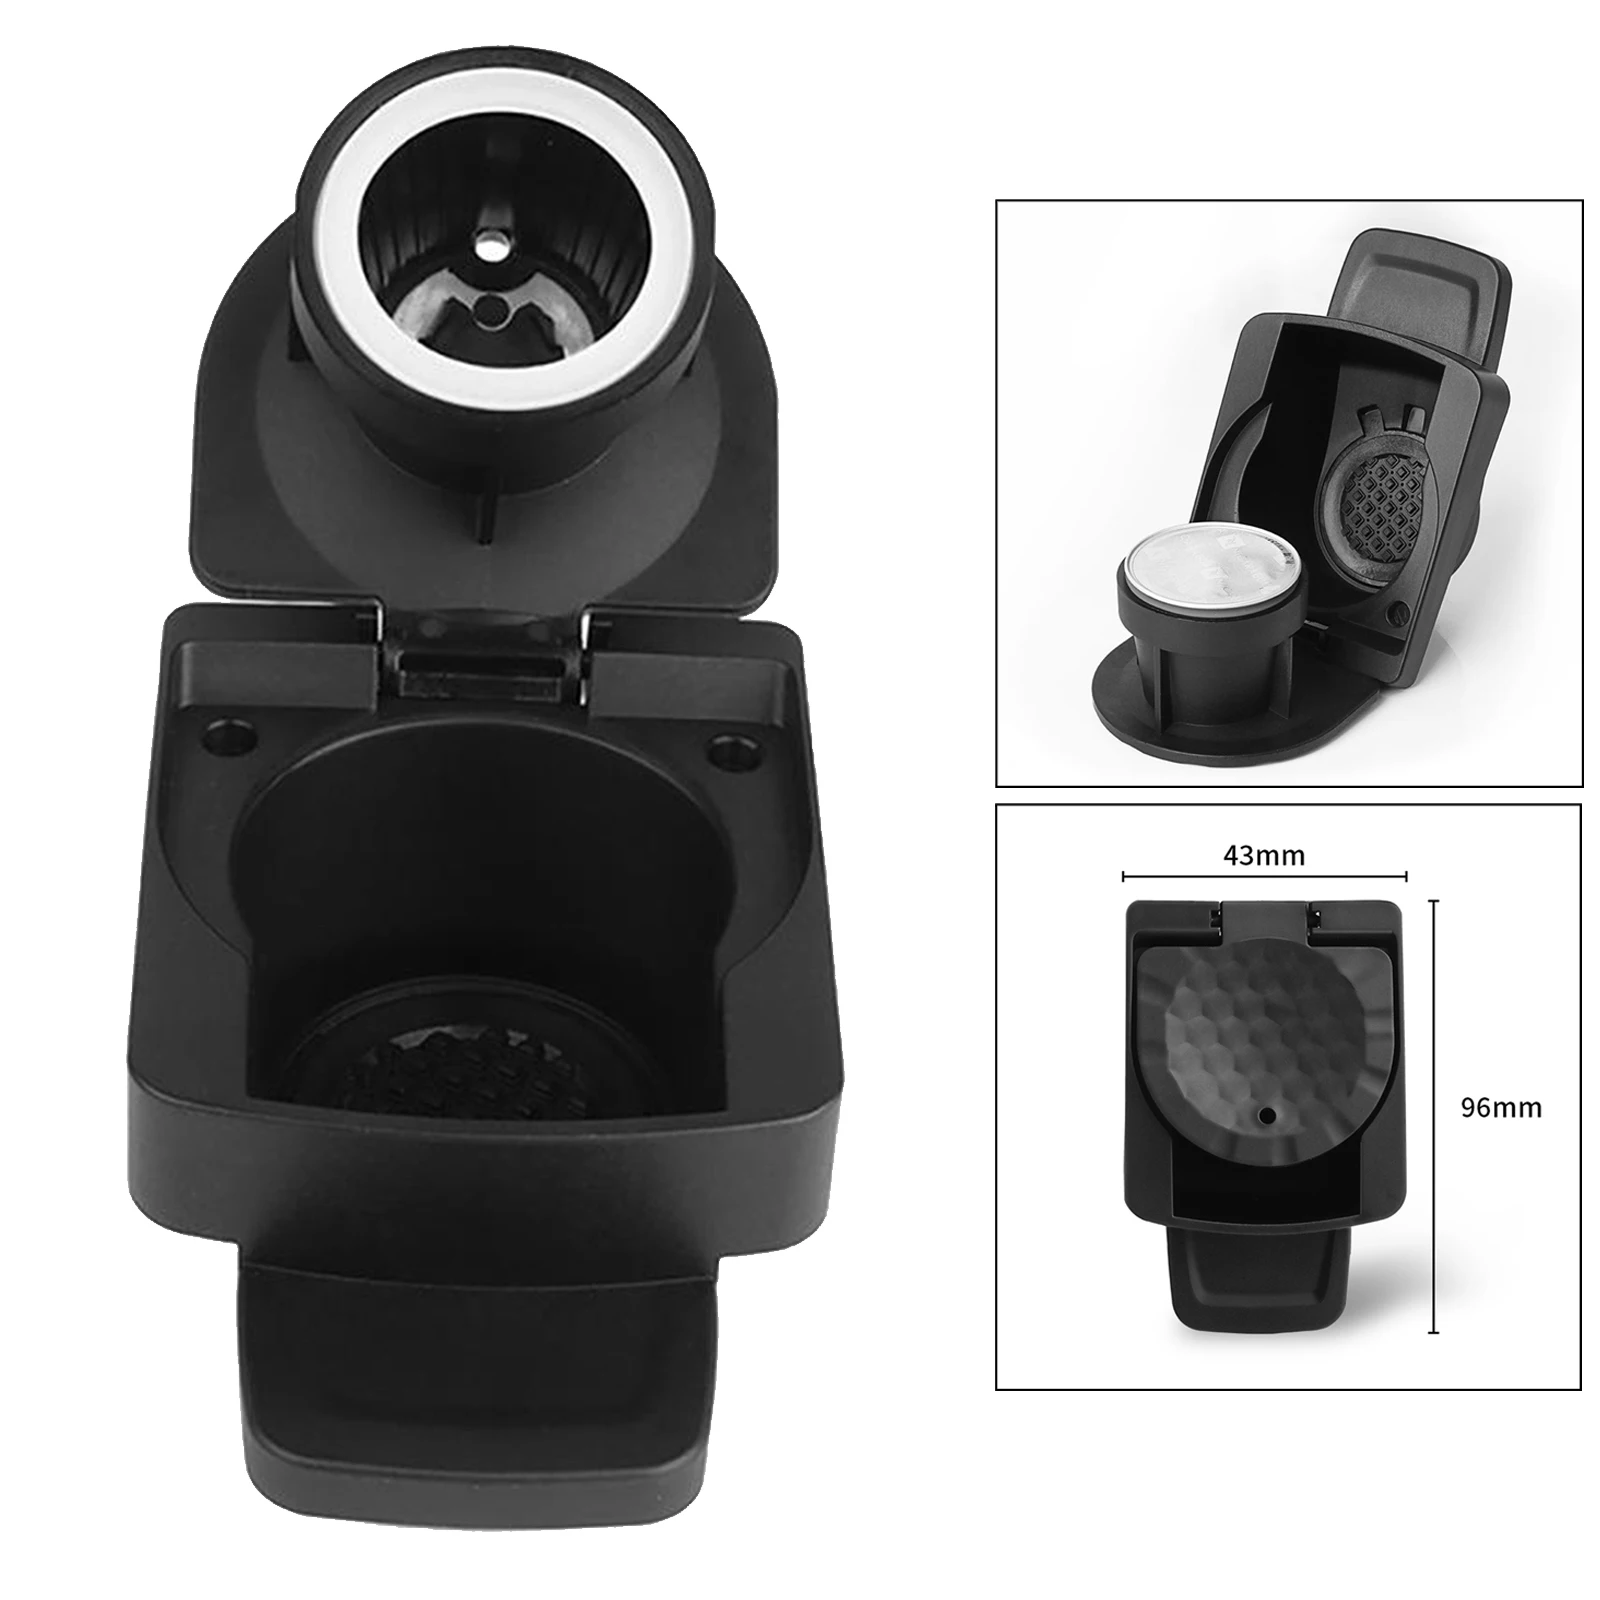 Capsule Adapter For Capsules Convert To A Holder Compatible With Dolce Gusto Crema Maker